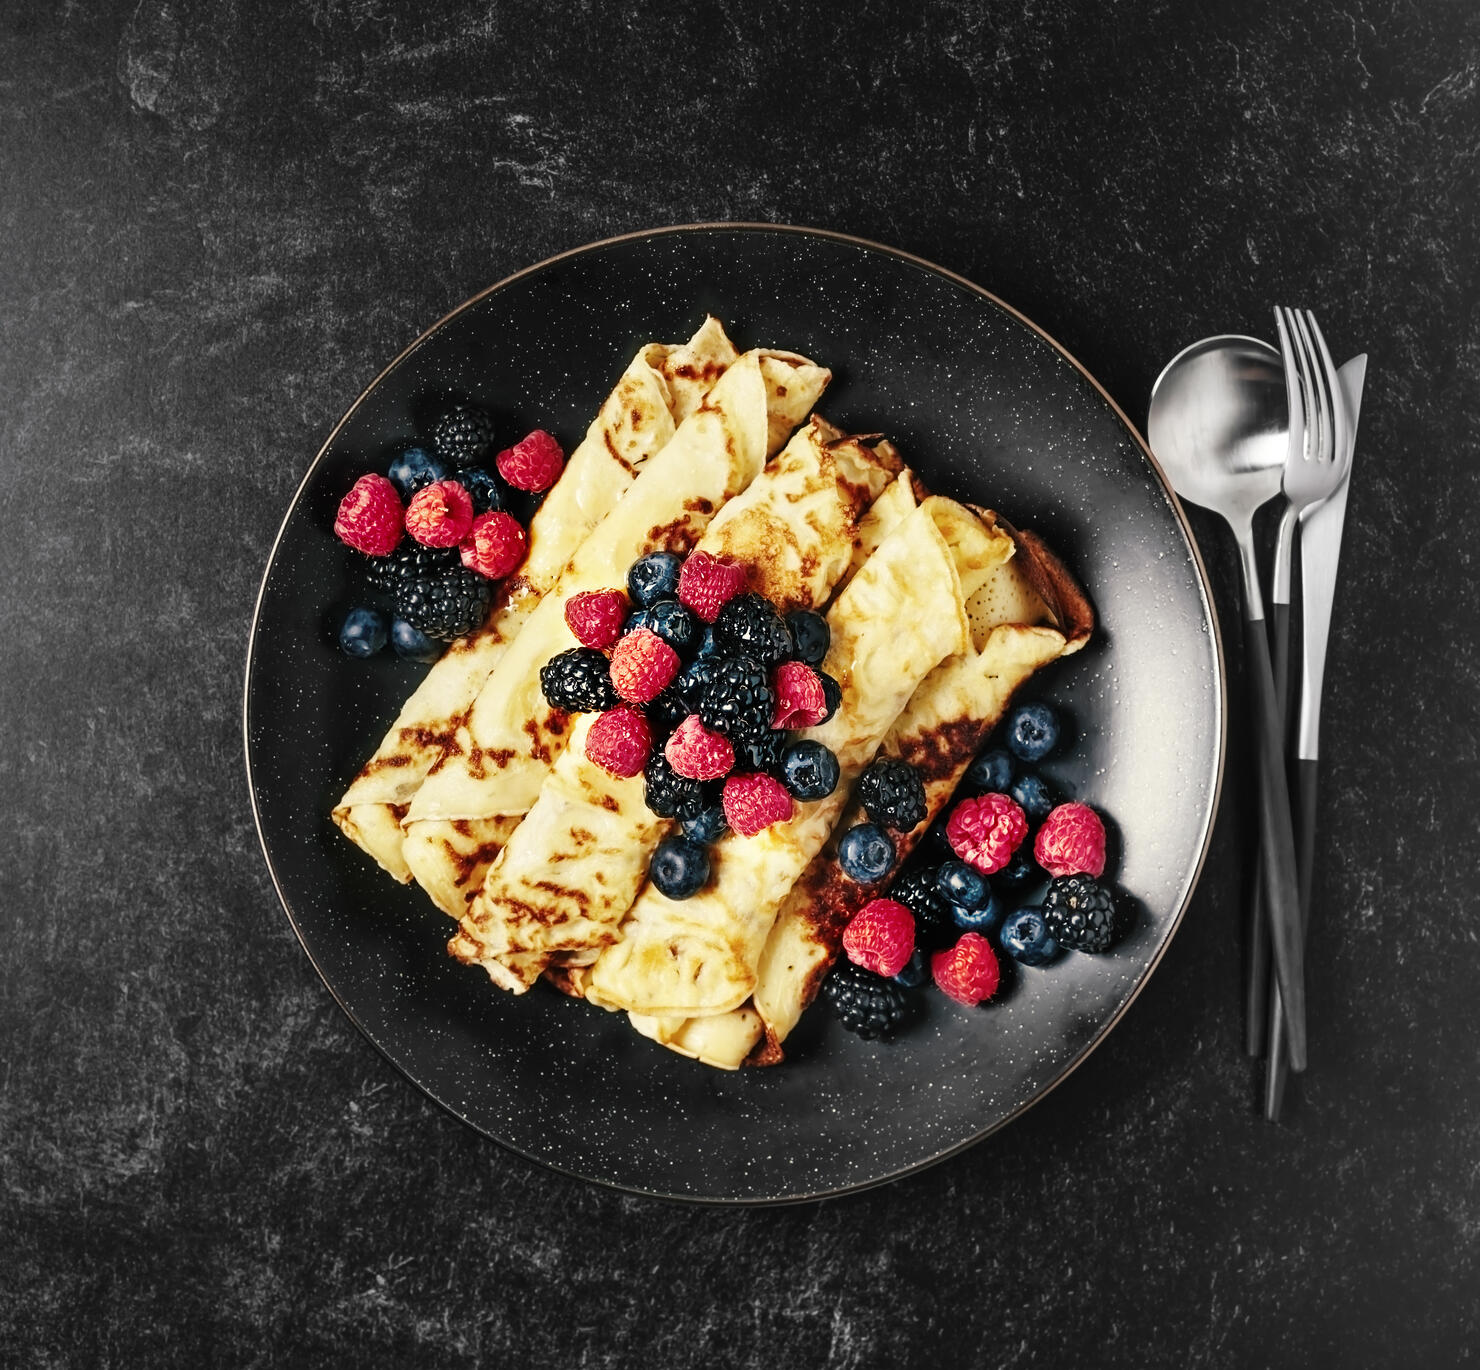 Plate of crepes with berries on black background